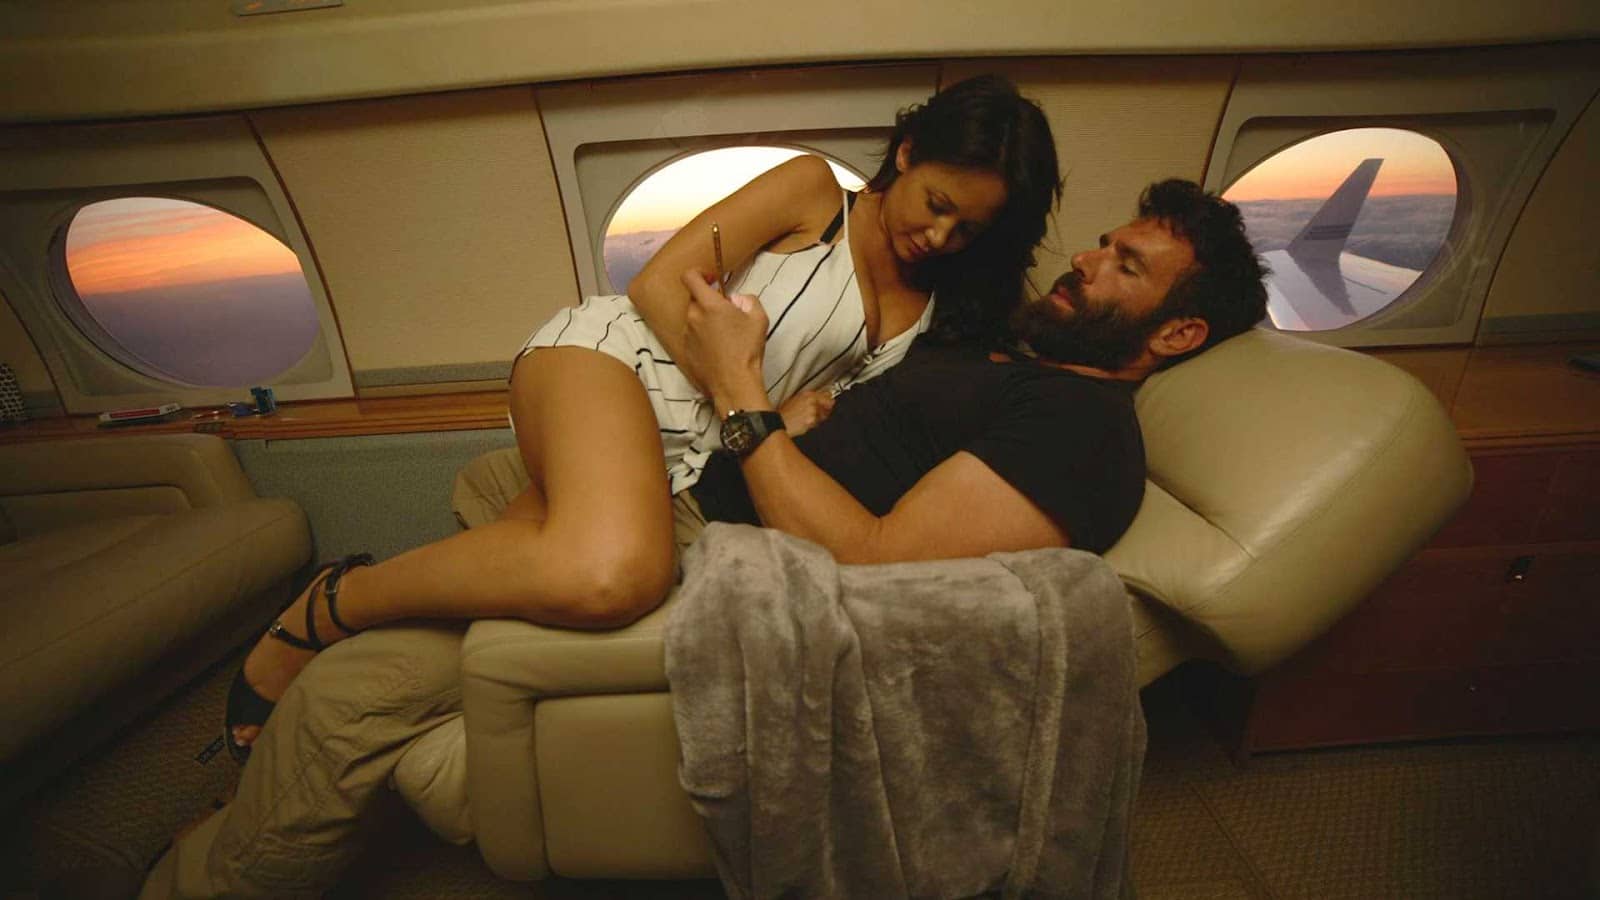 How to Have Sex on an Airplane, According to Flight Attendants sex stories real nudity public sex